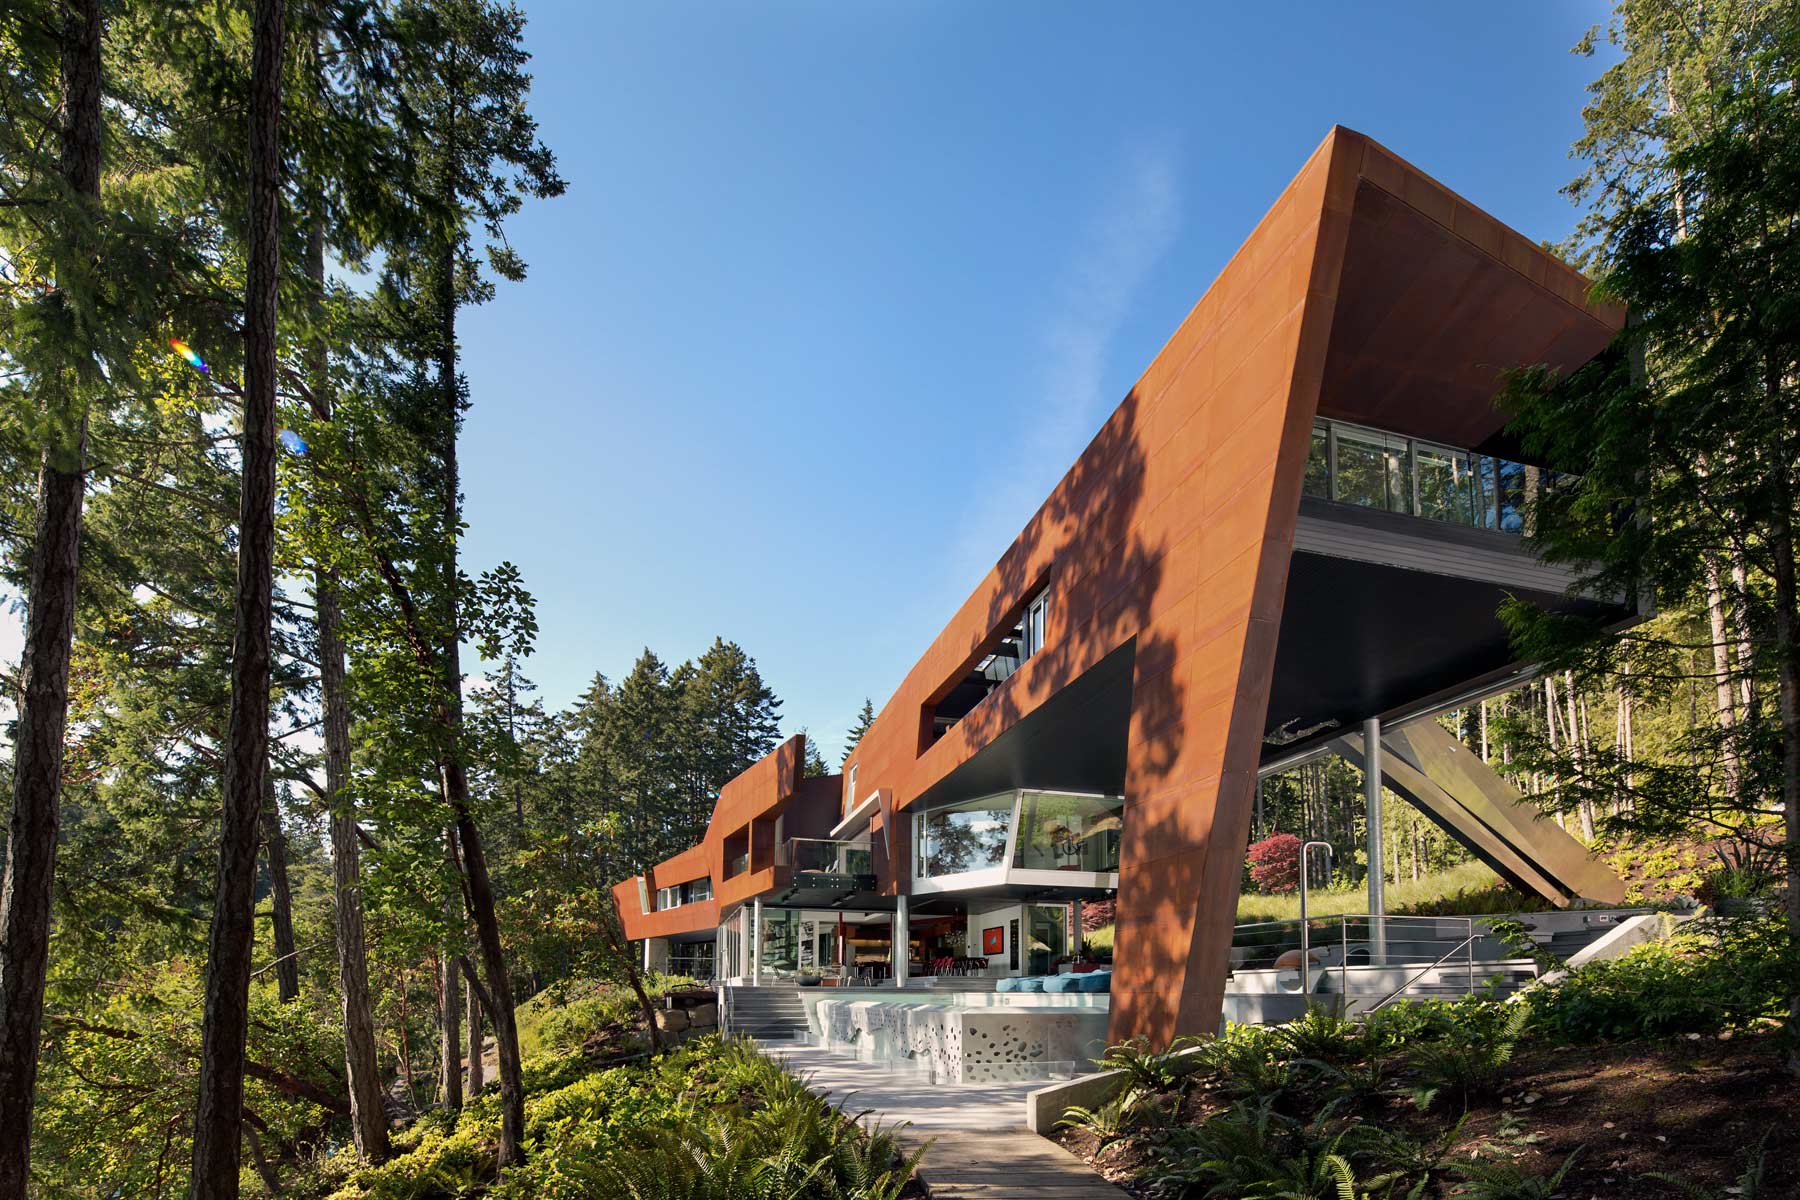 Photograph of the Gulf Islands Residence designed by AA Robins.